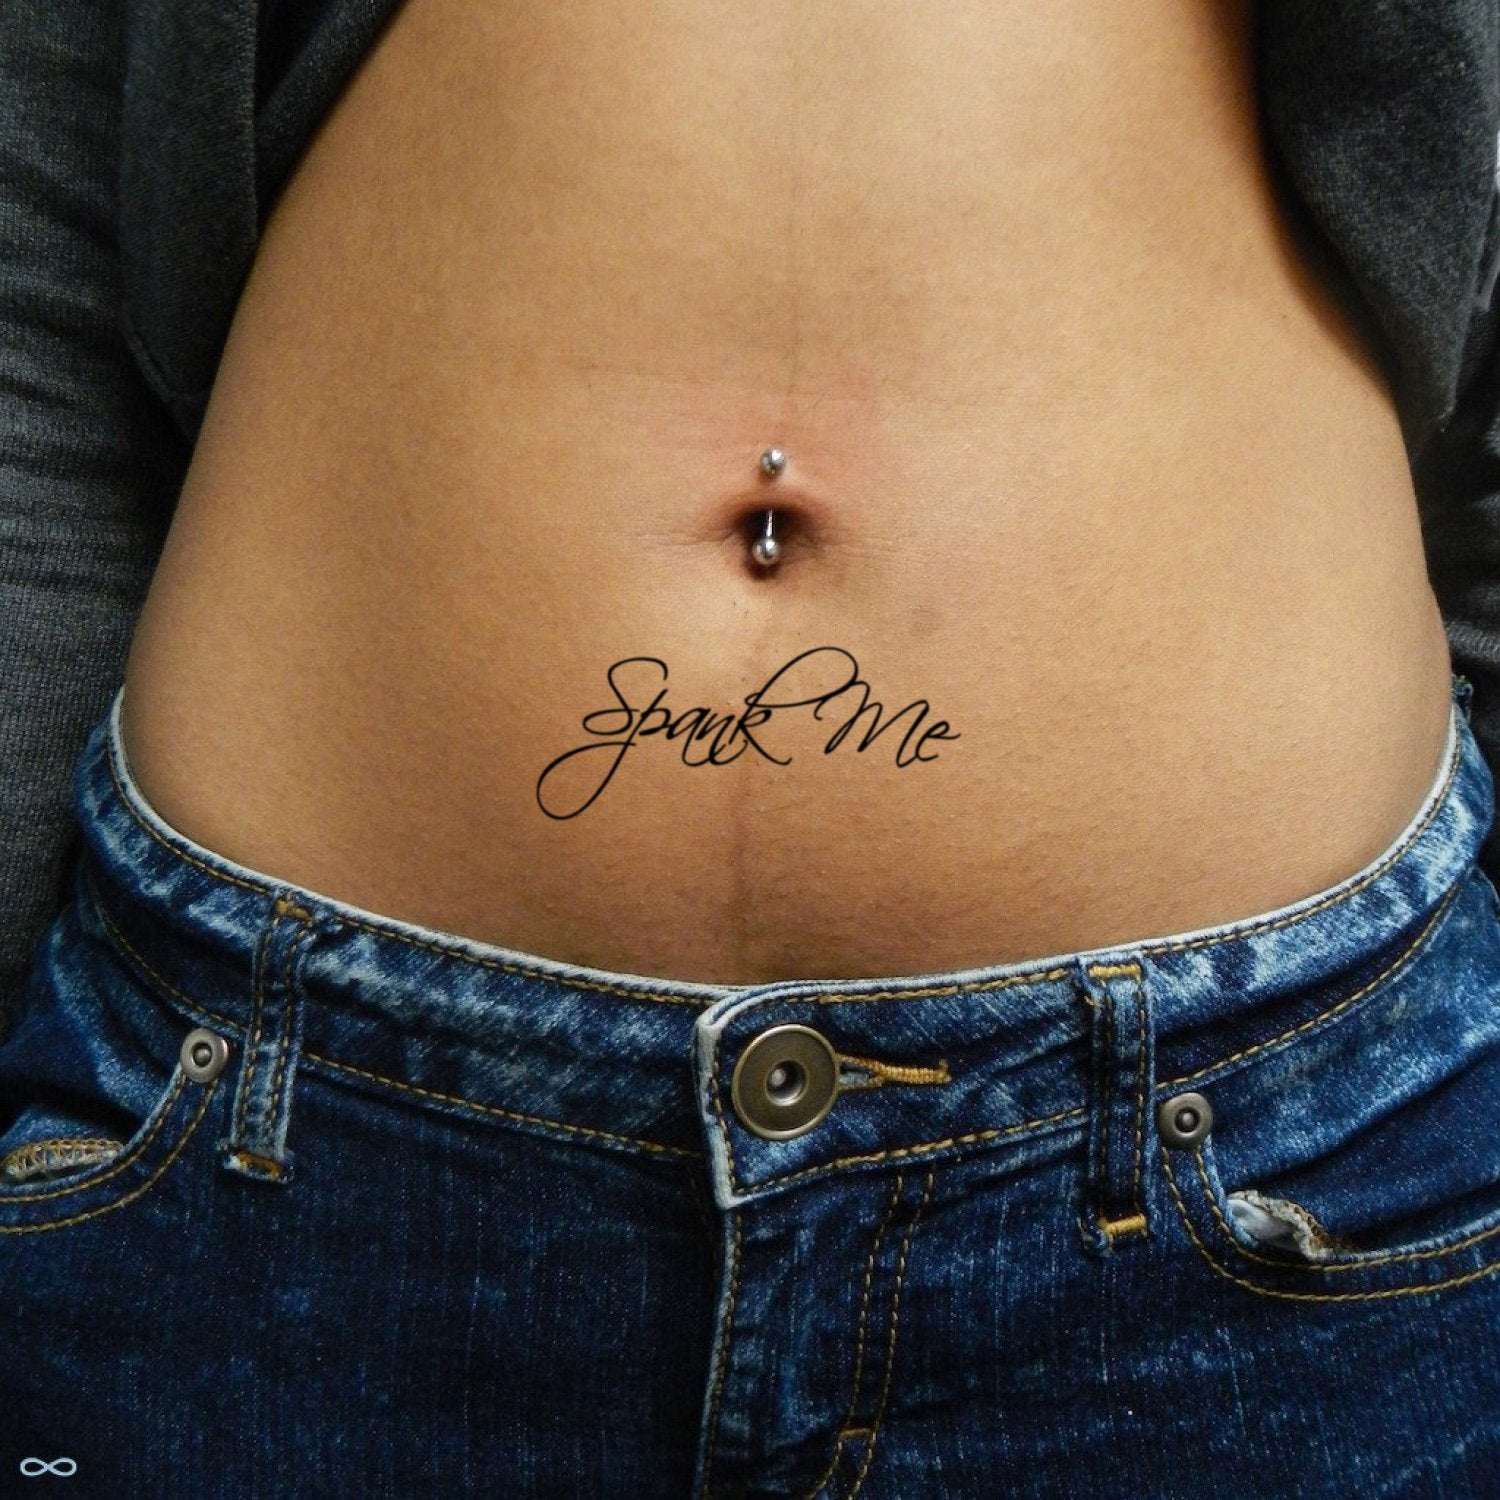 fake small spank me lettering temporary tattoo sticker design idea on stomach